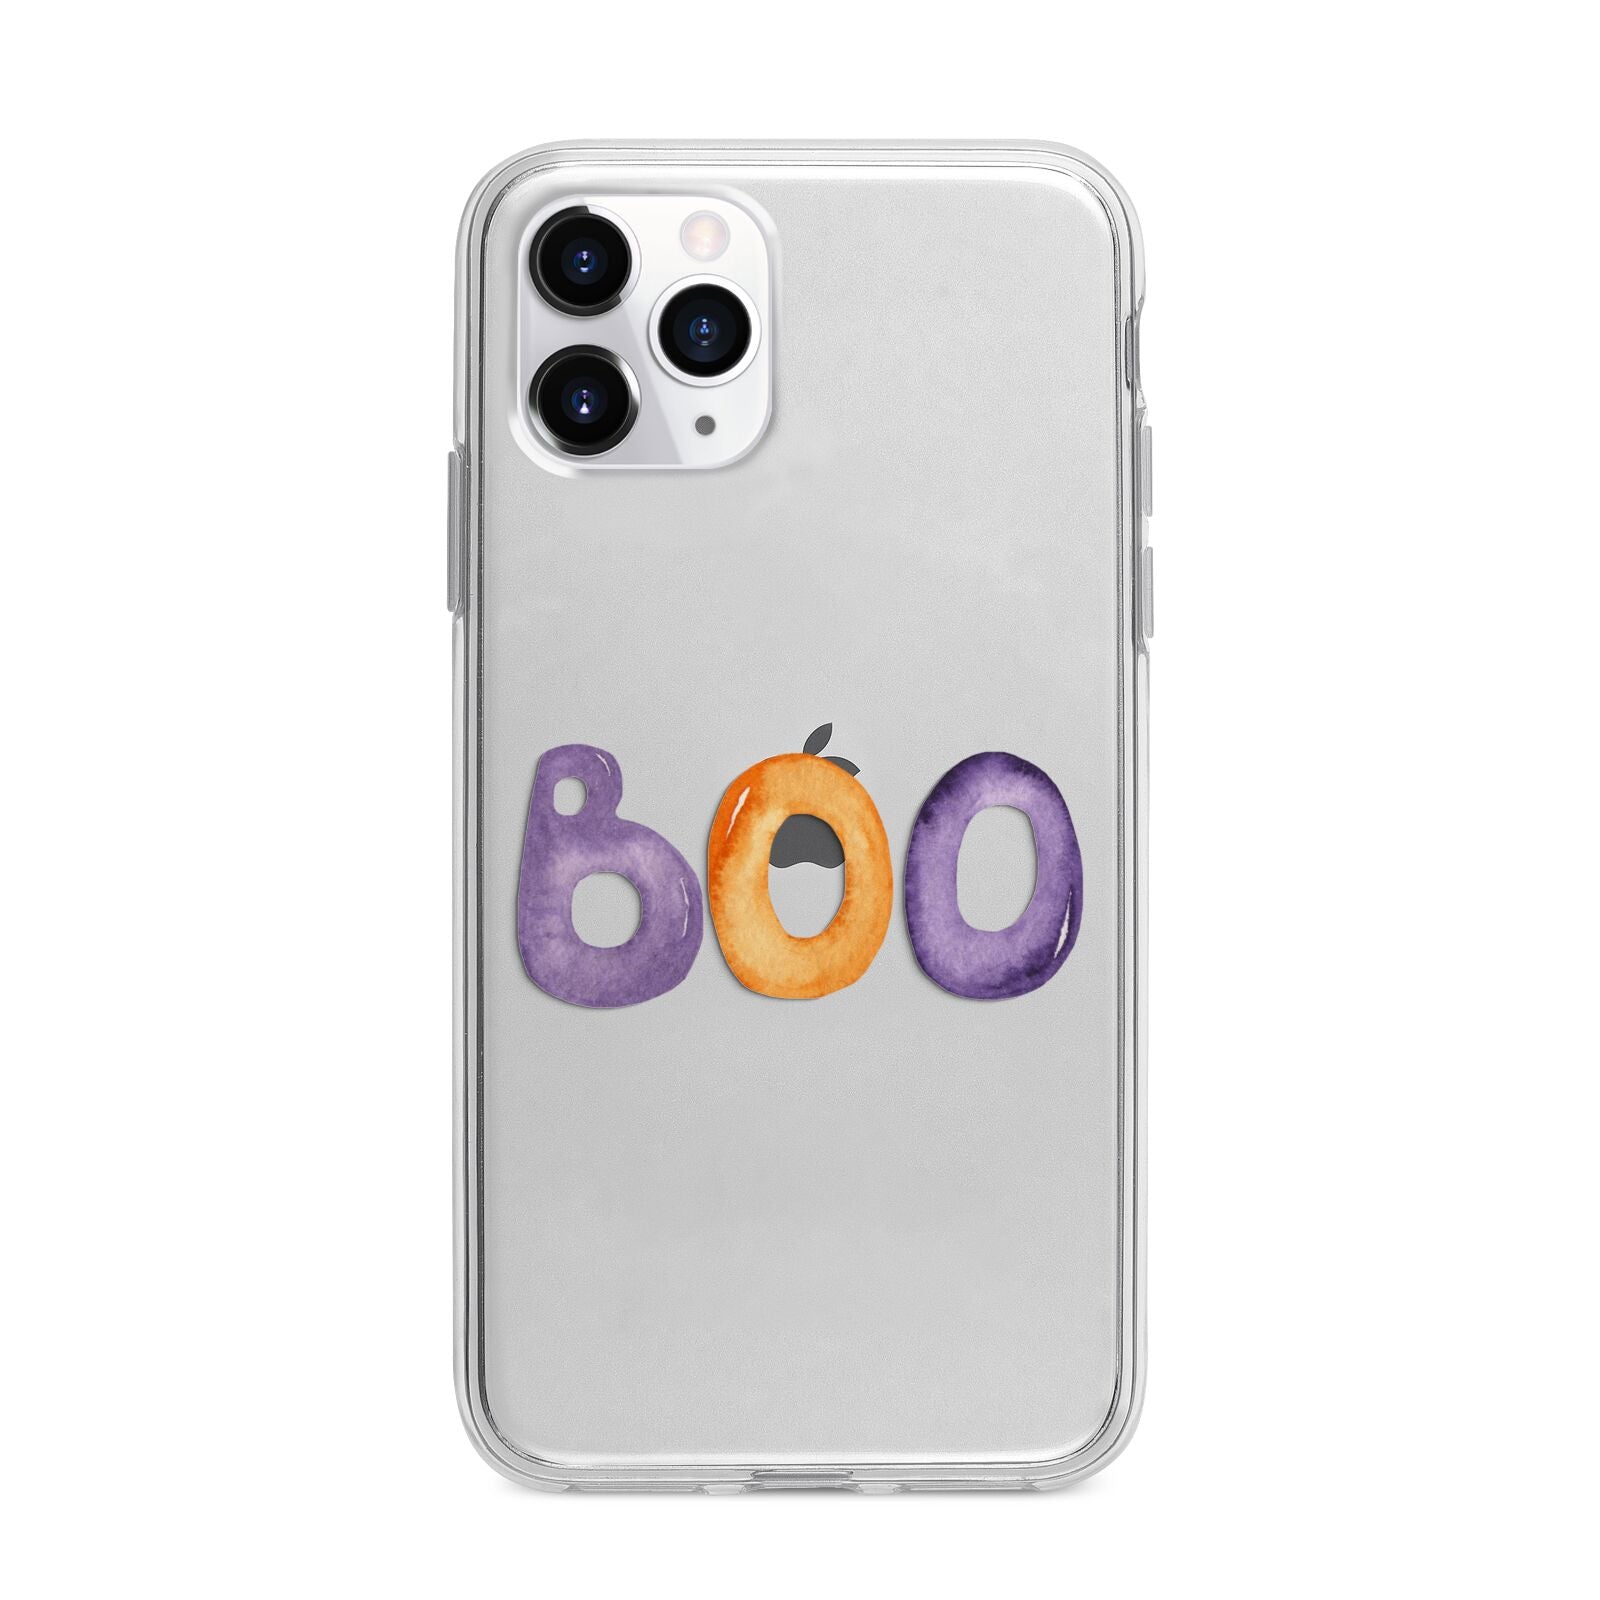 Boo Apple iPhone 11 Pro Max in Silver with Bumper Case